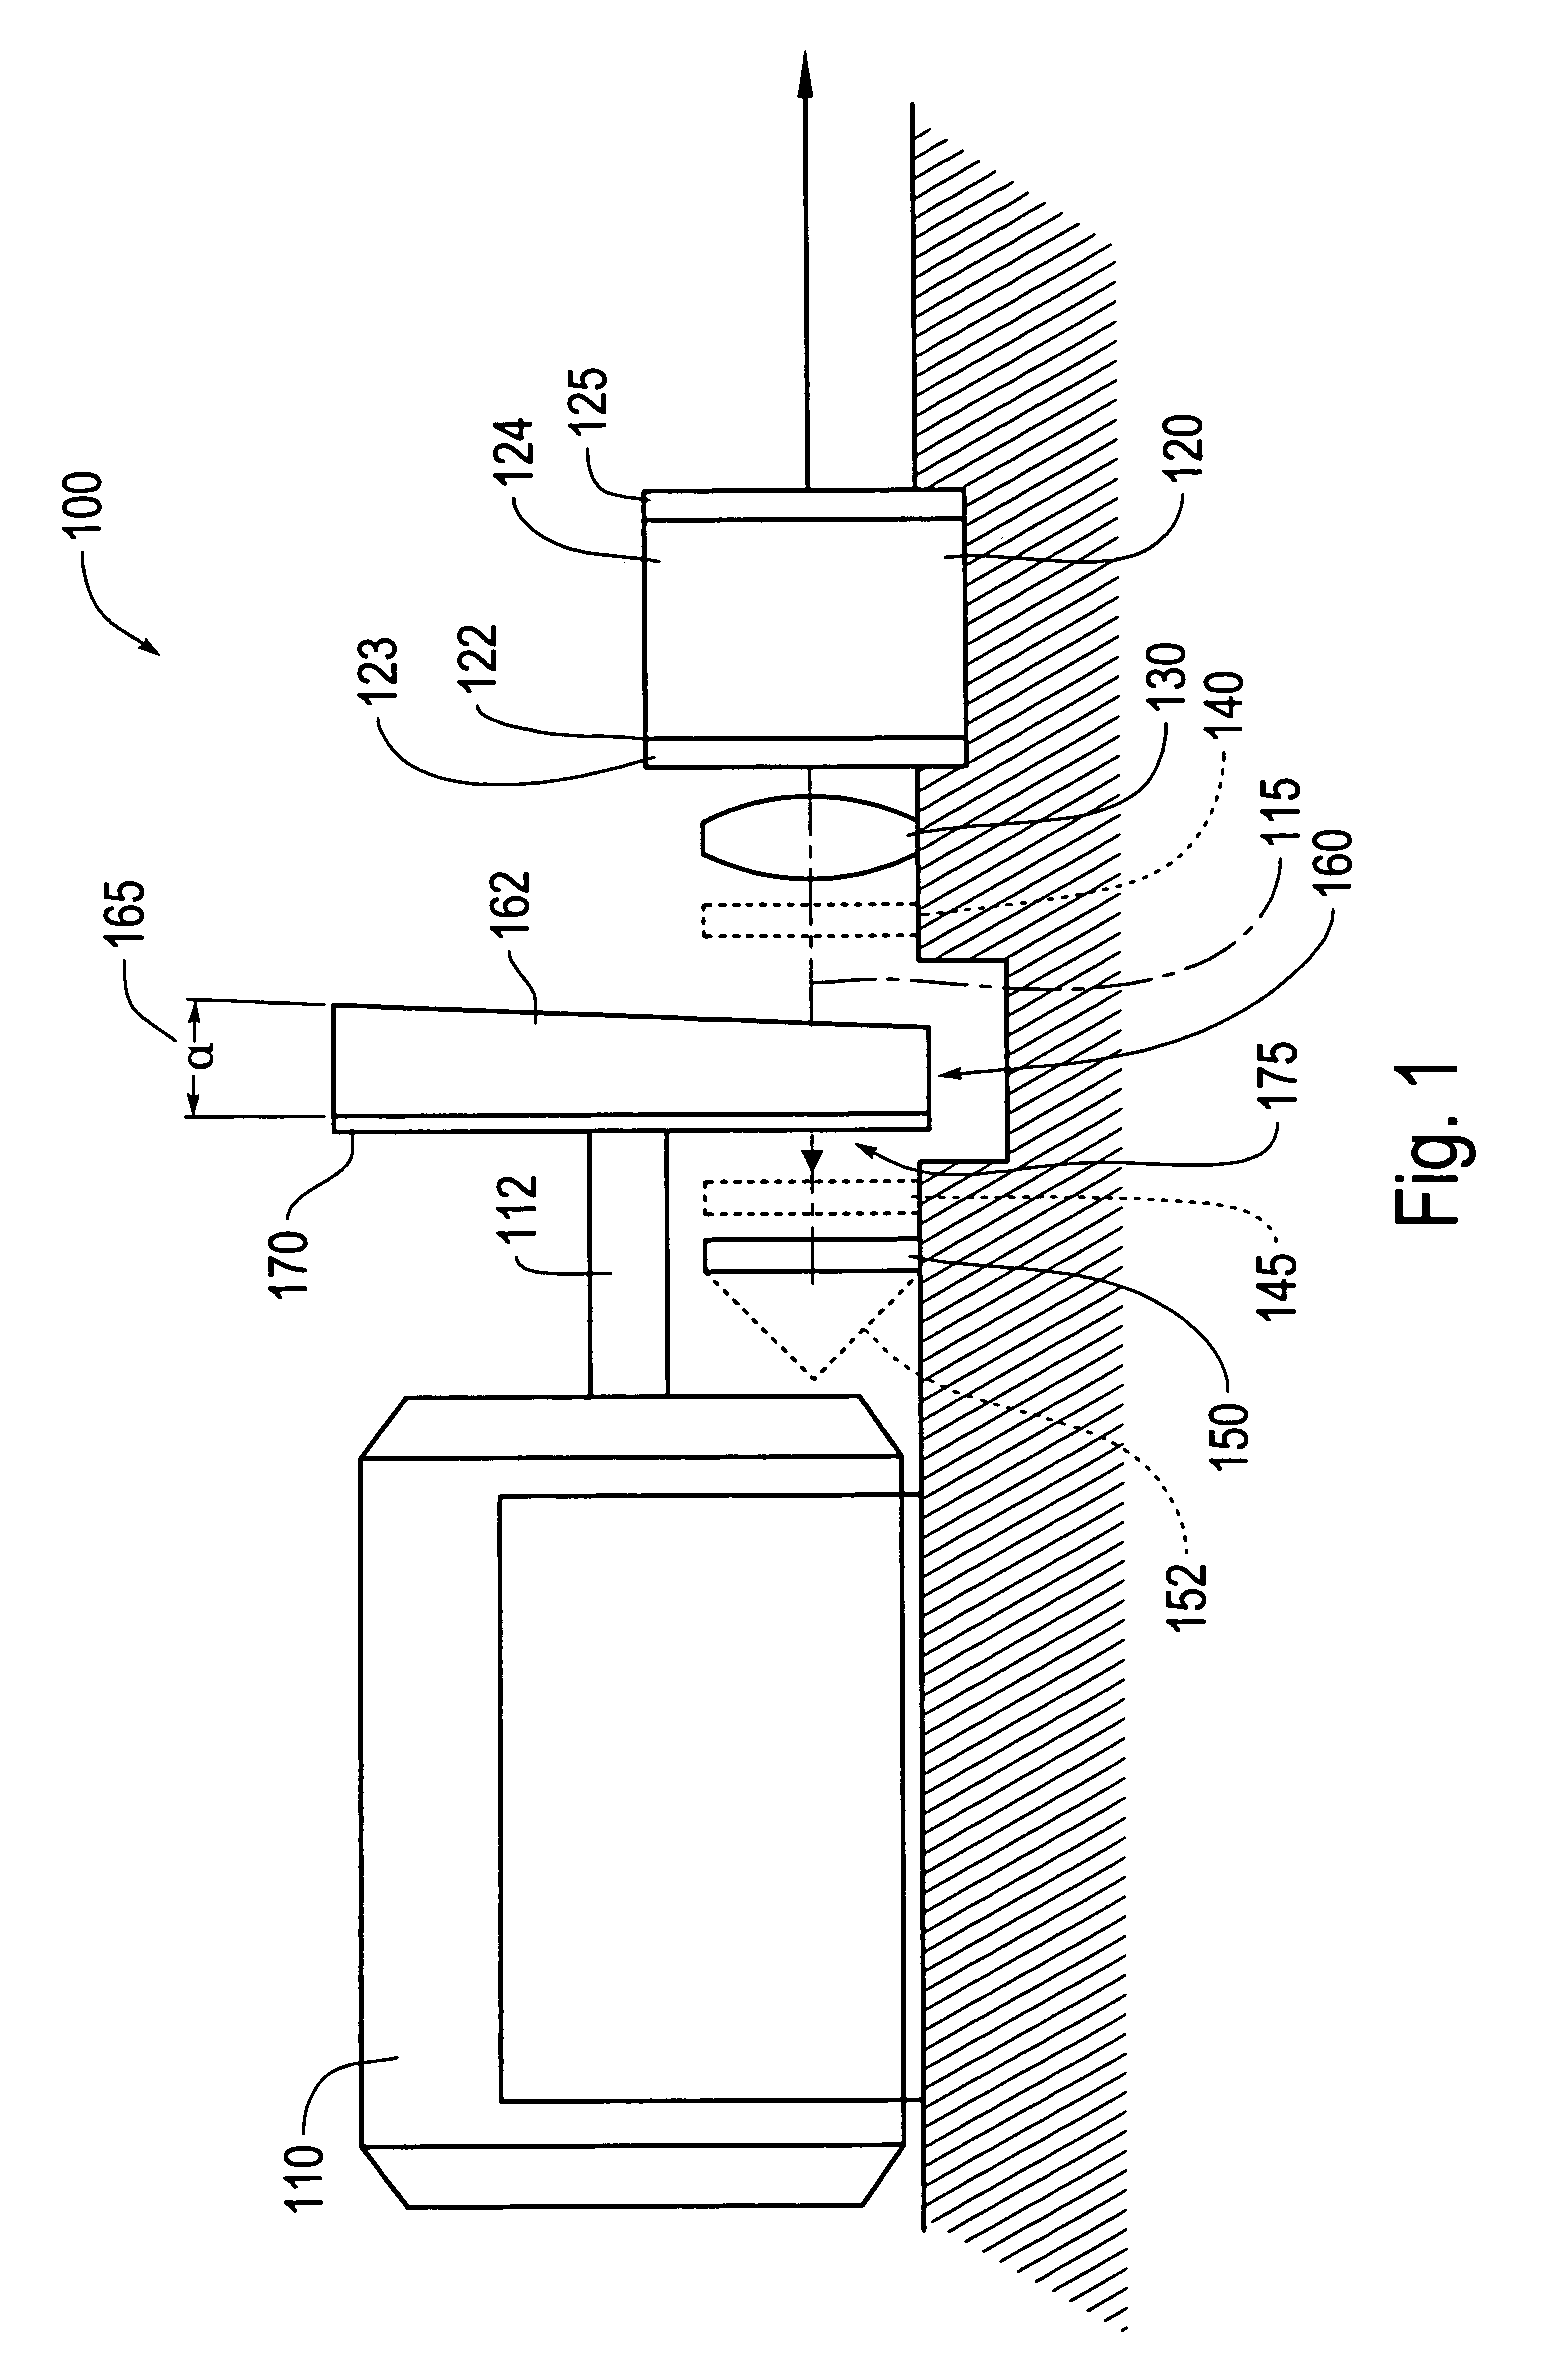 External cavity laser with rotary tuning element